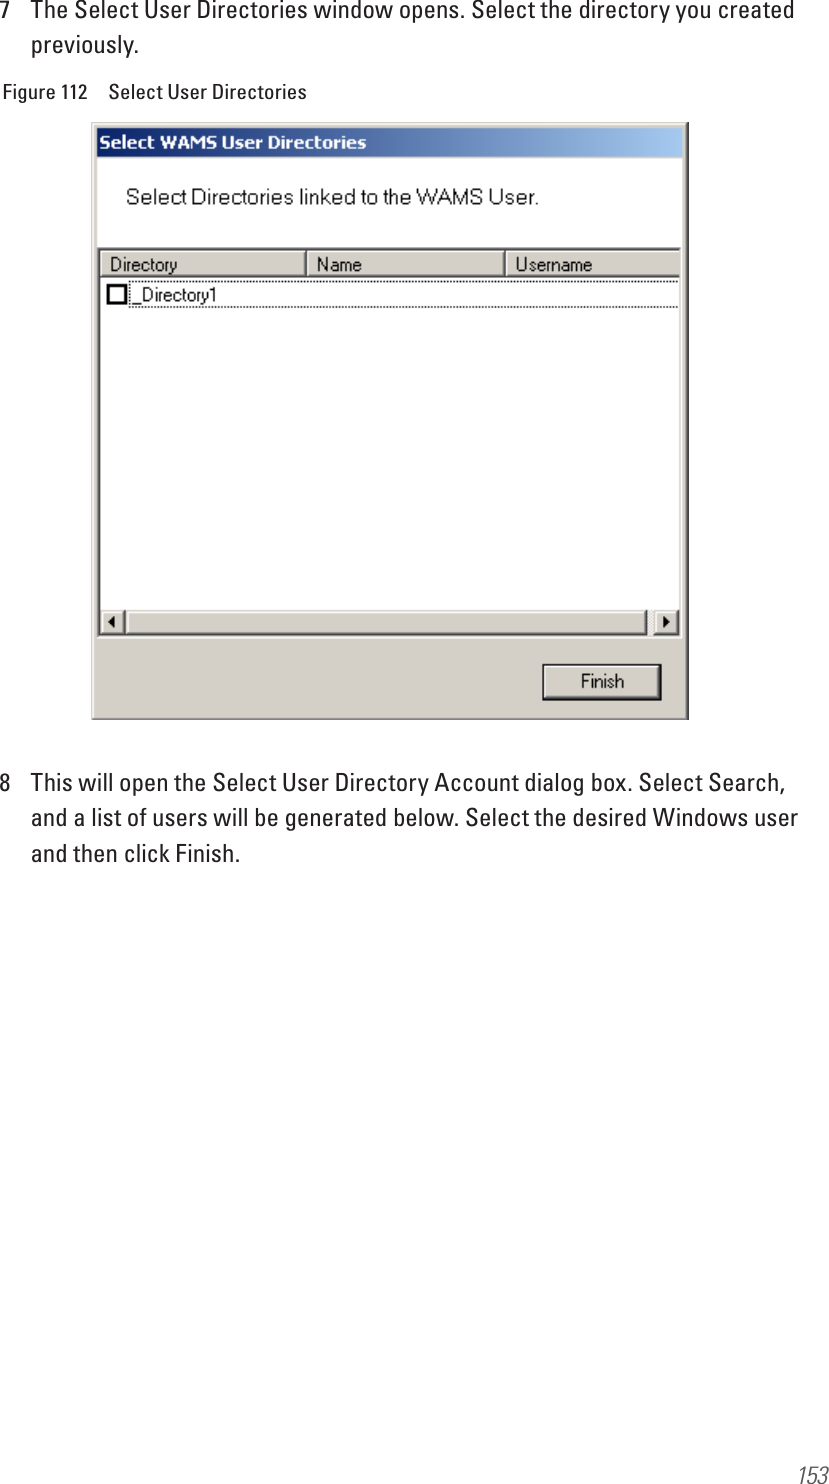 1537  The Select User Directories window opens. Select the directory you created previously. Figure 112  Select User Directories8  This will open the Select User Directory Account dialog box. Select Search, and a list of users will be generated below. Select the desired Windows user and then click Finish.